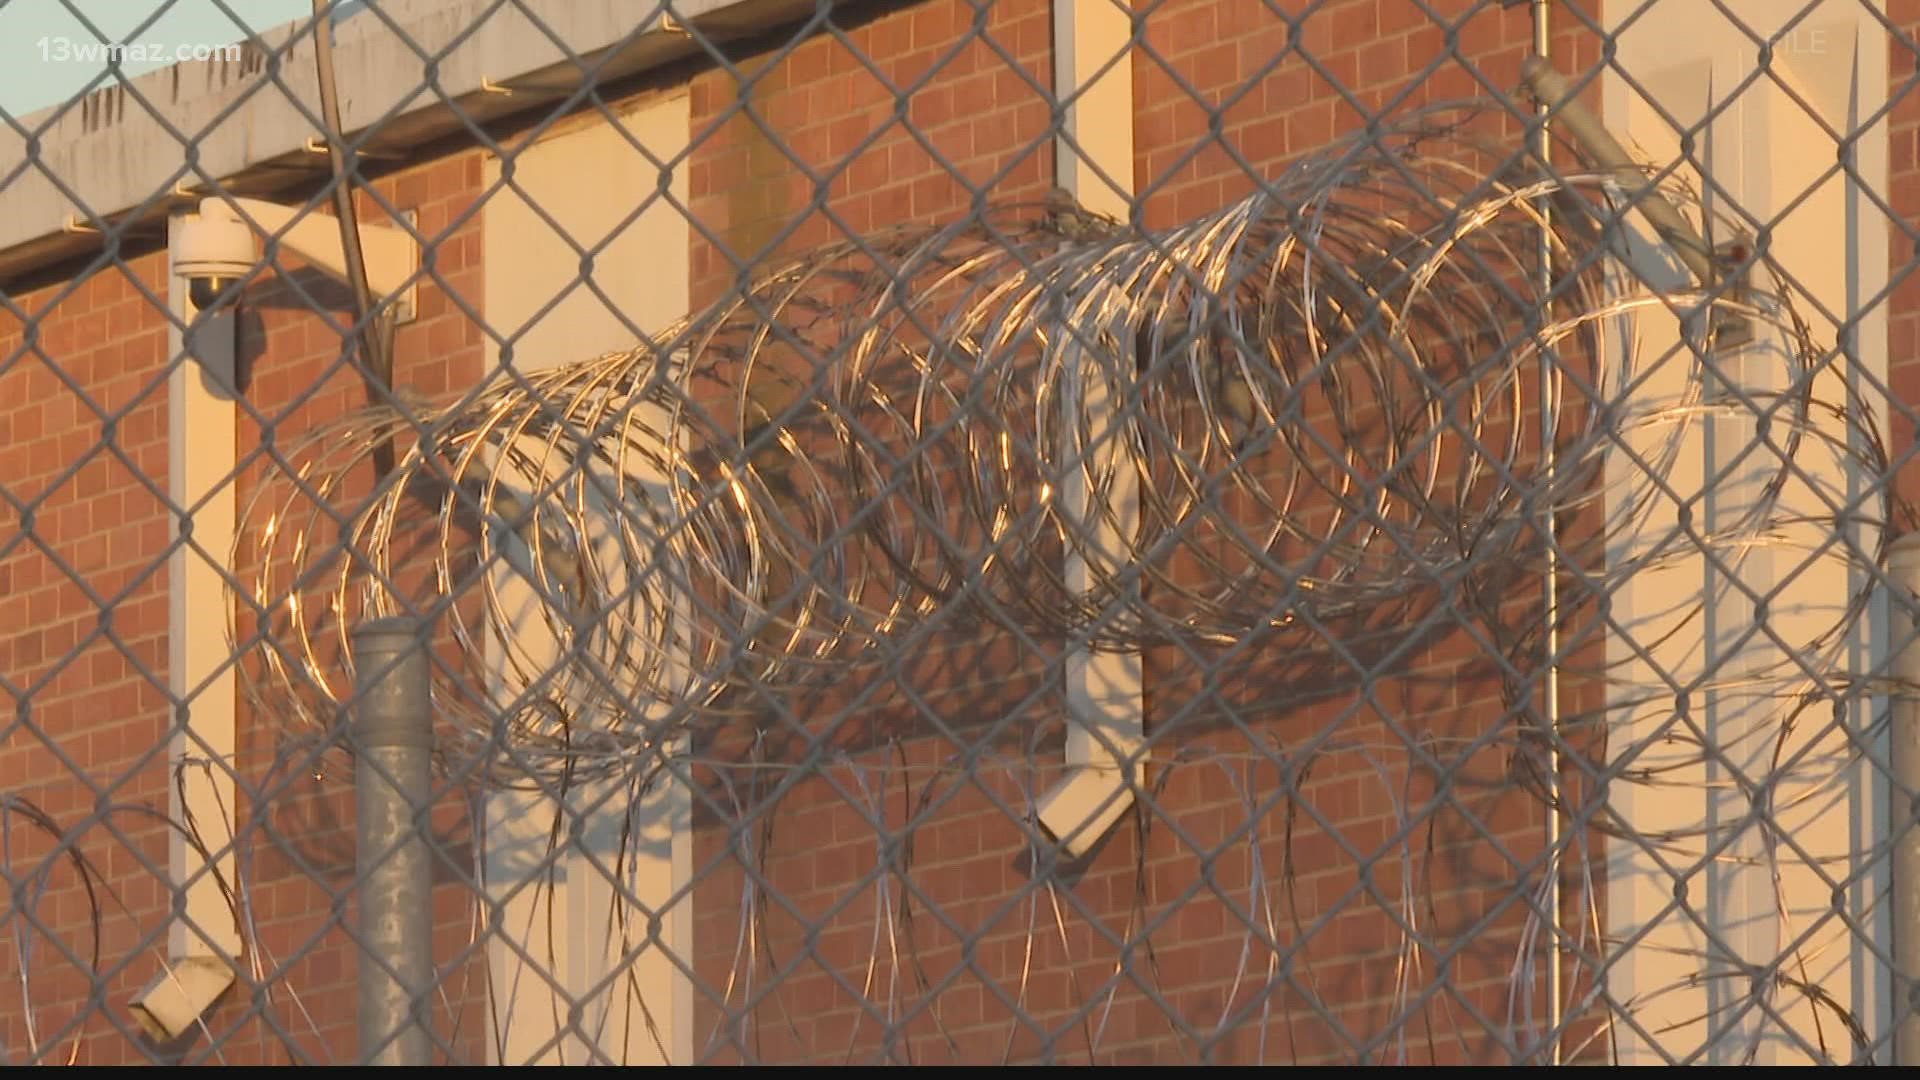 Law enforcement agencies are concerned a bill making its way through the Georgia legislature could lead to jail overcrowding.